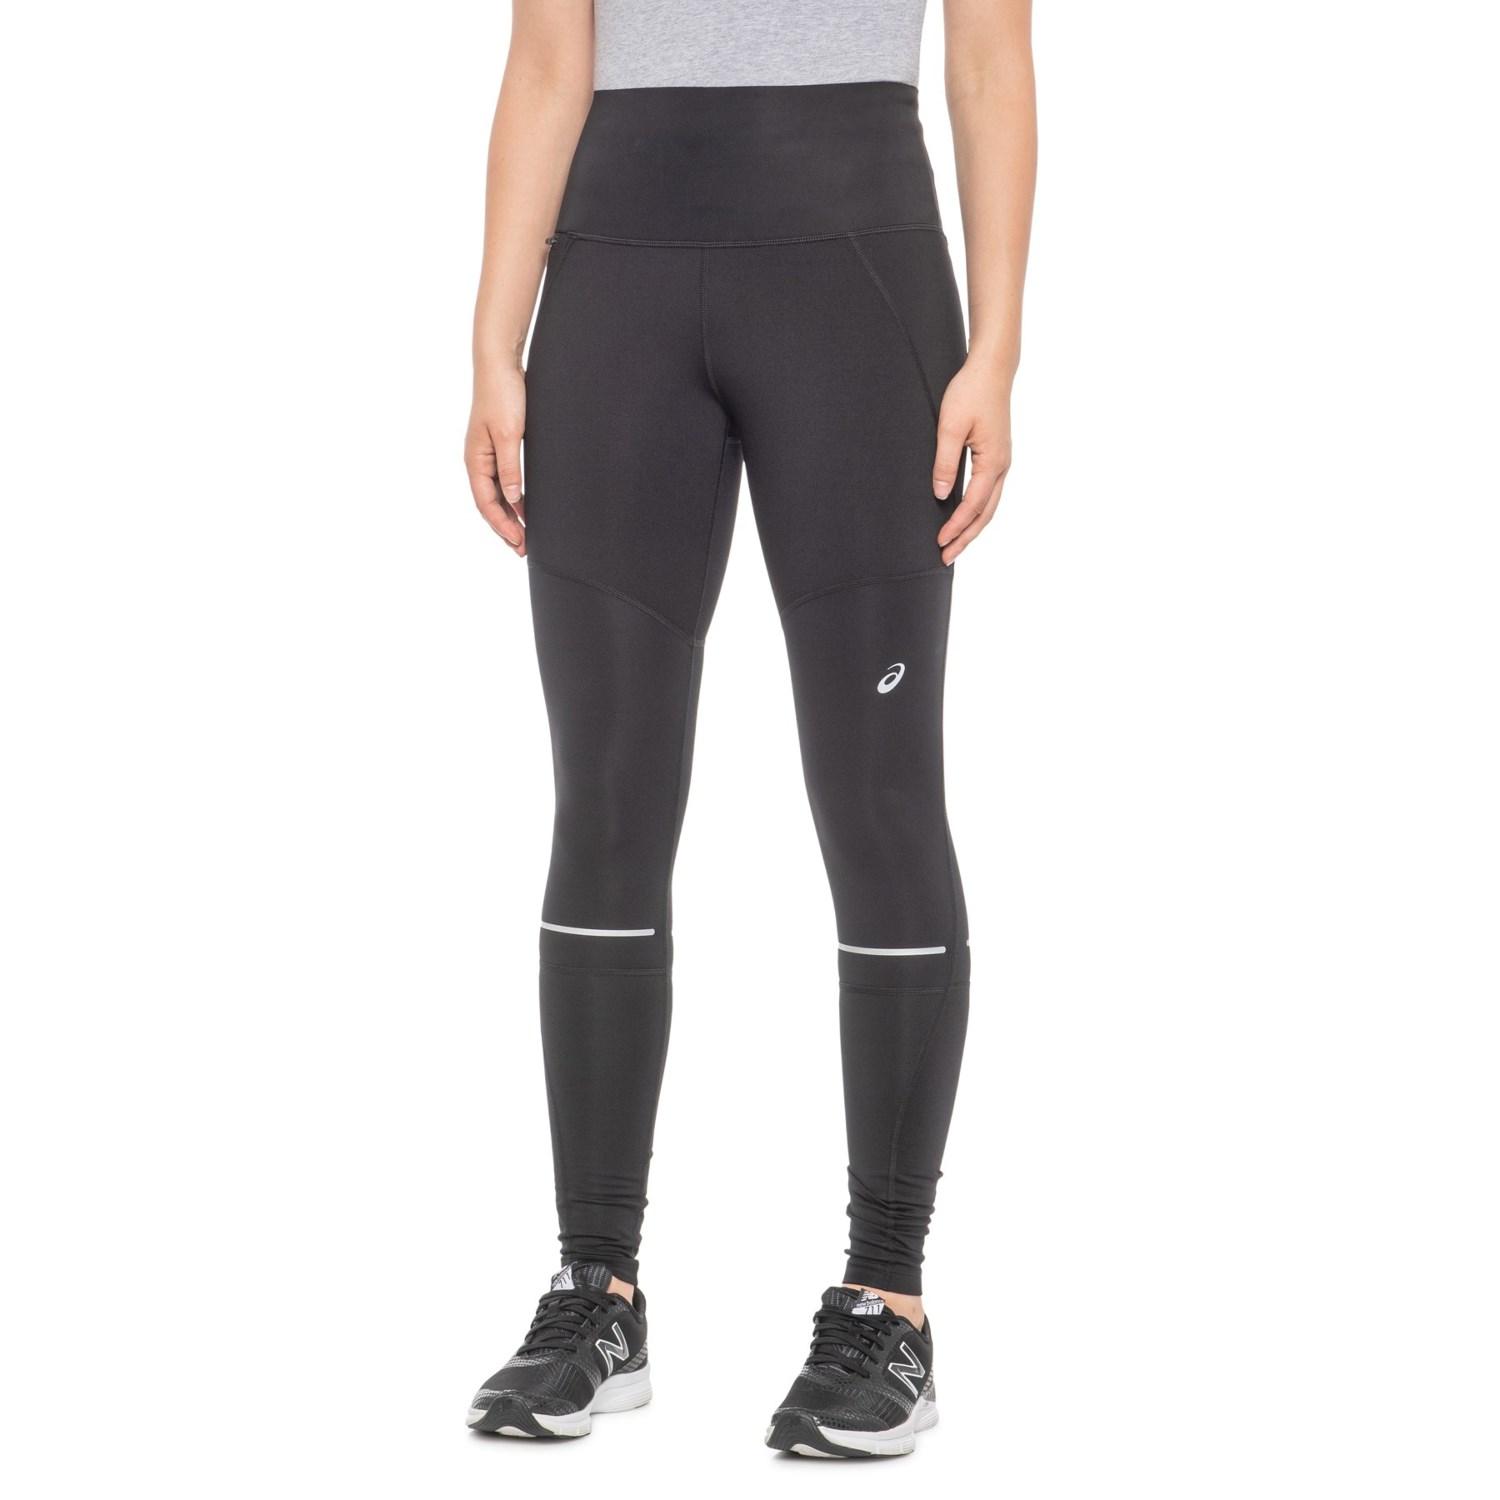 dilemma thesaurus Supersonic speed Asics System Tights Factory Sale, SAVE 55%.